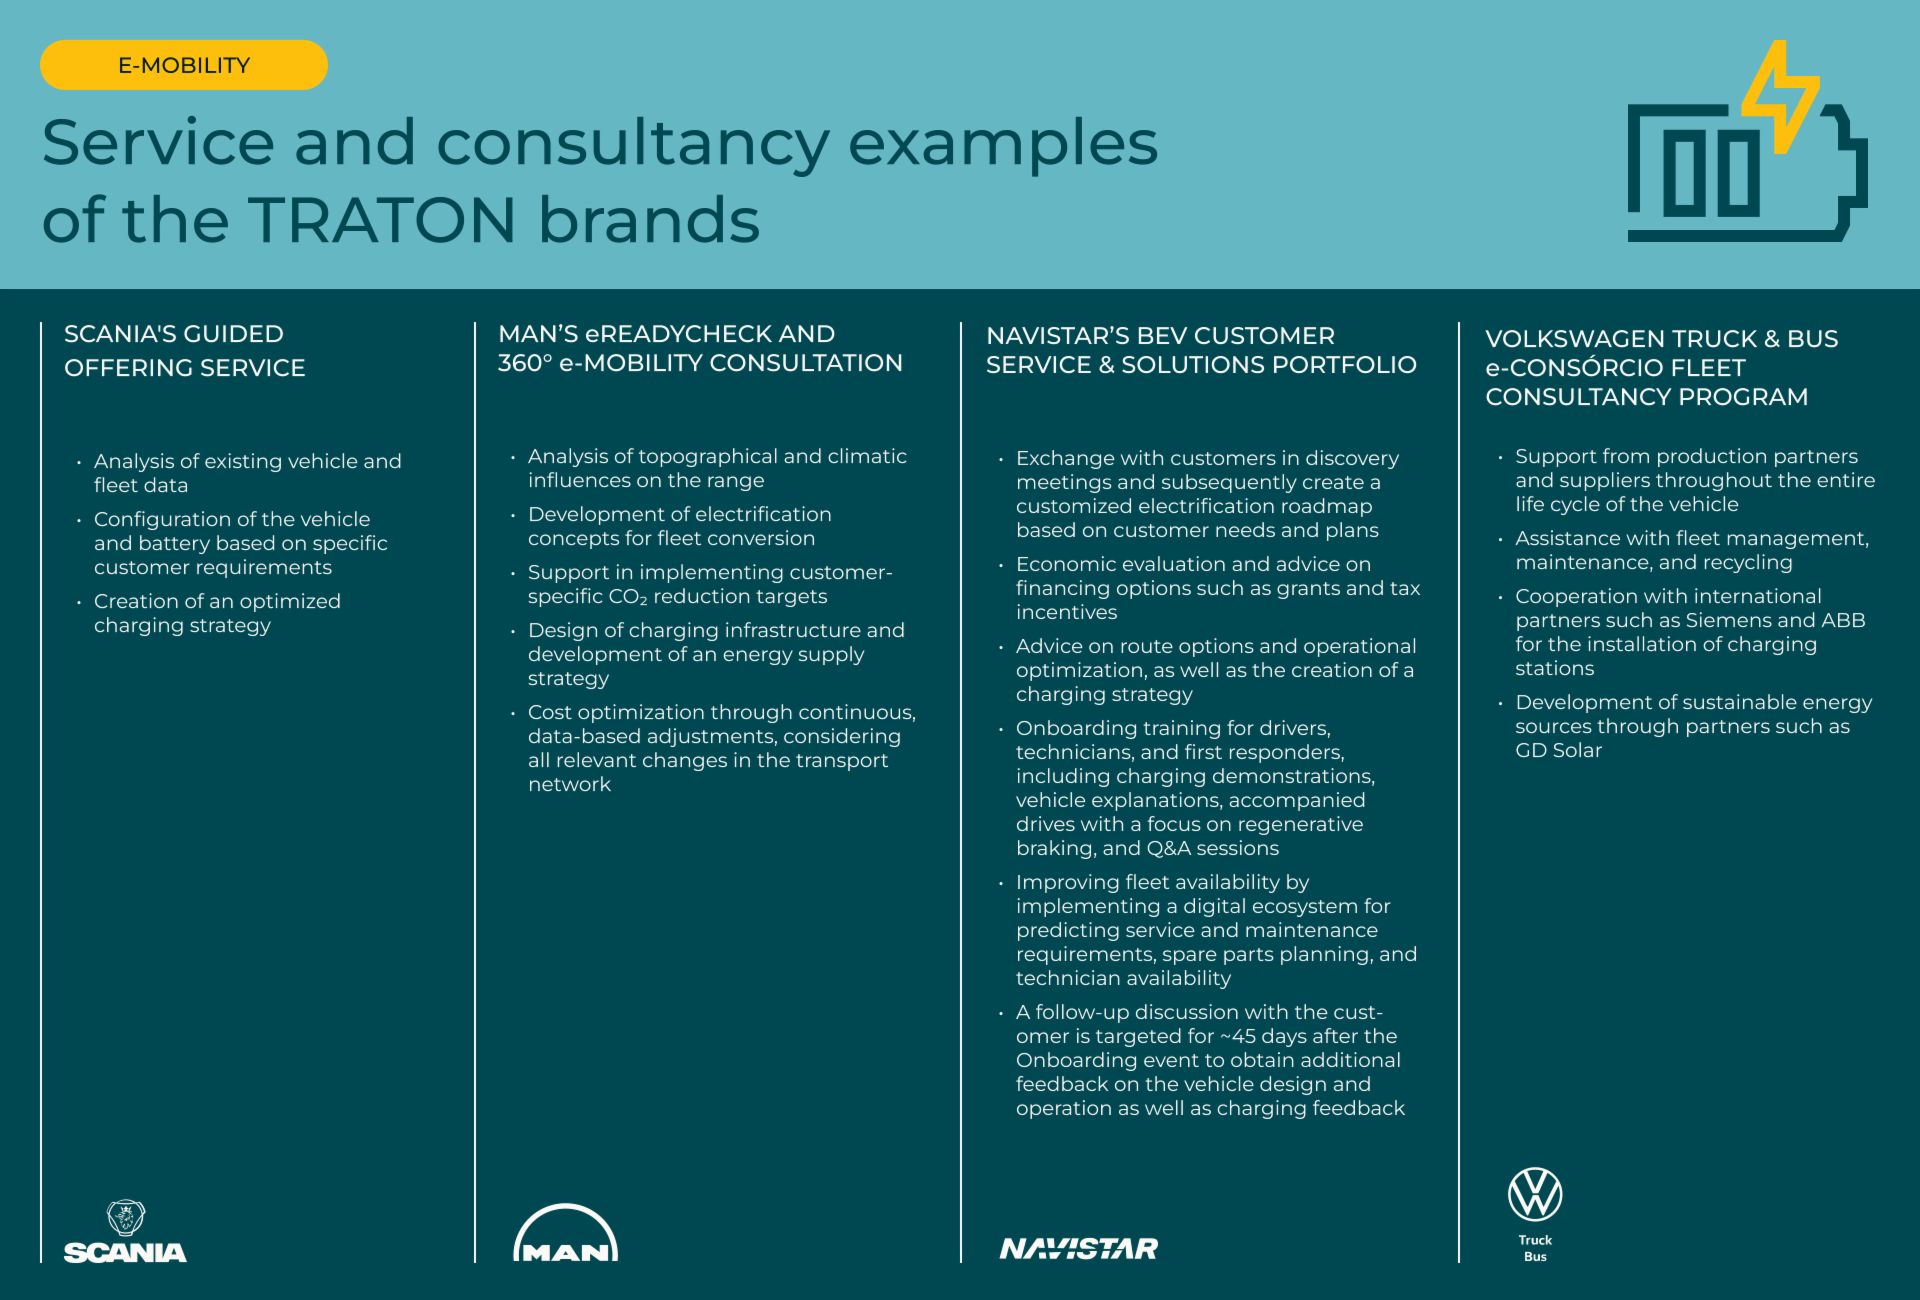 Overview: Service and consultancy examples of the TRATON brands